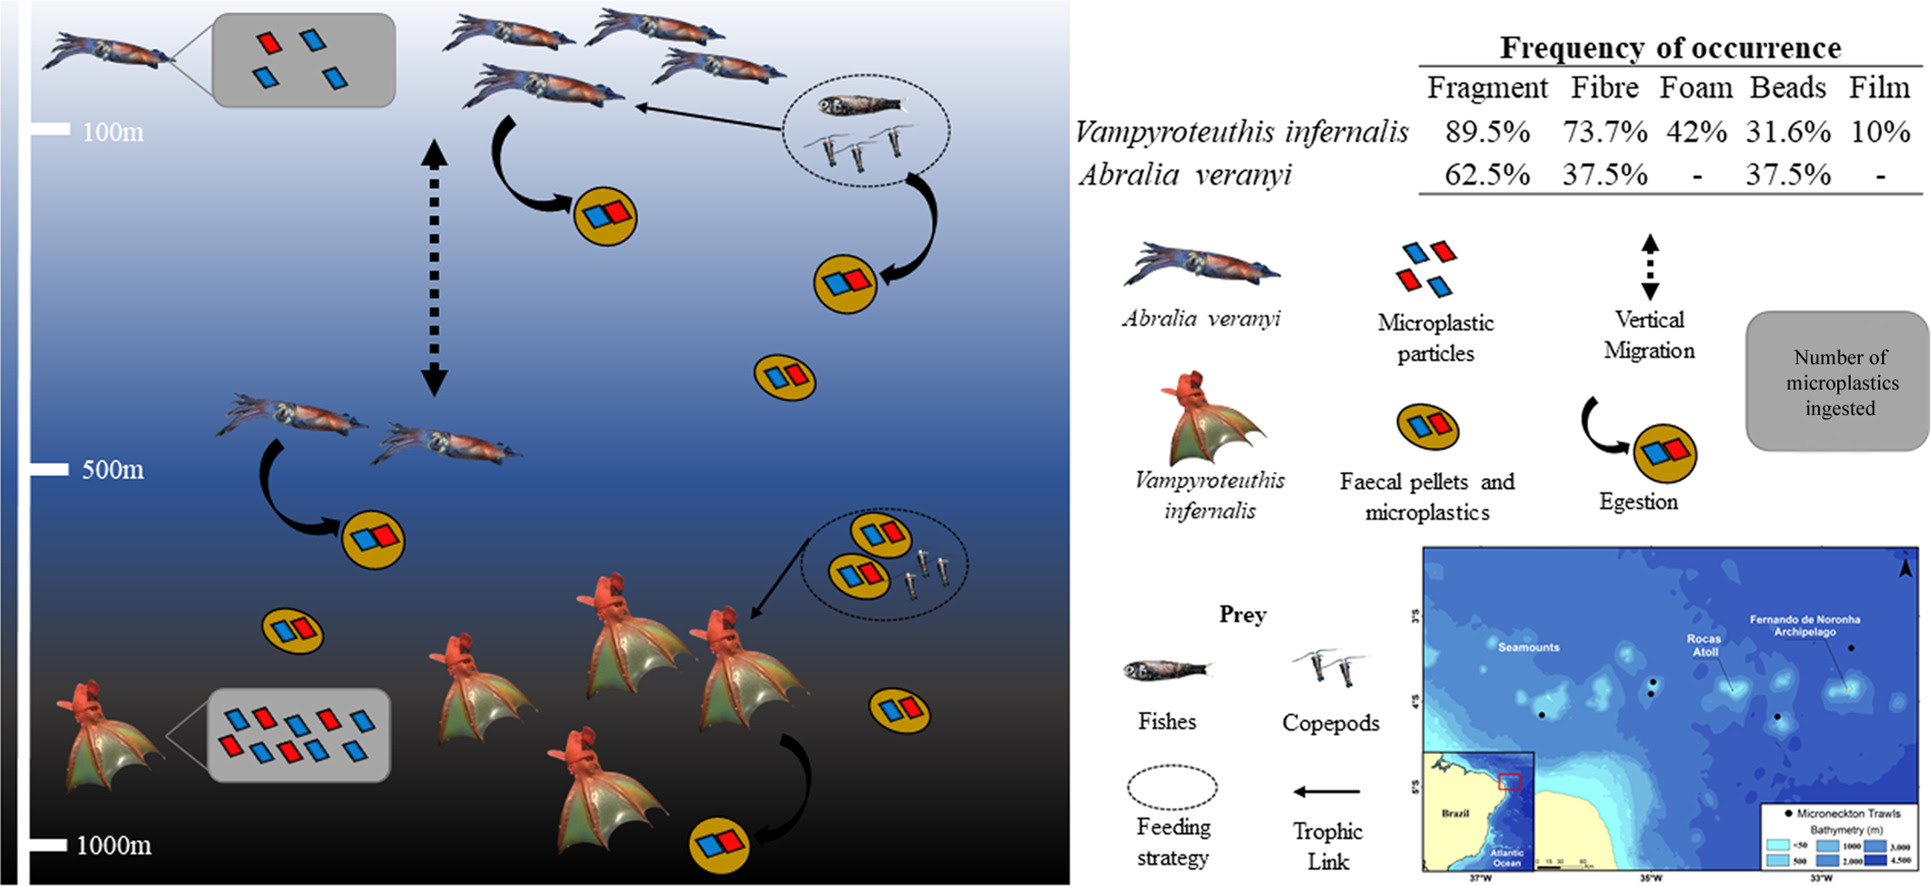 Plastic in the inferno: Microplastic contamination in deep-sea cephalopods (Vampyroteuthis infernalis and Abralia veranyi) from the southwestern Atlantic